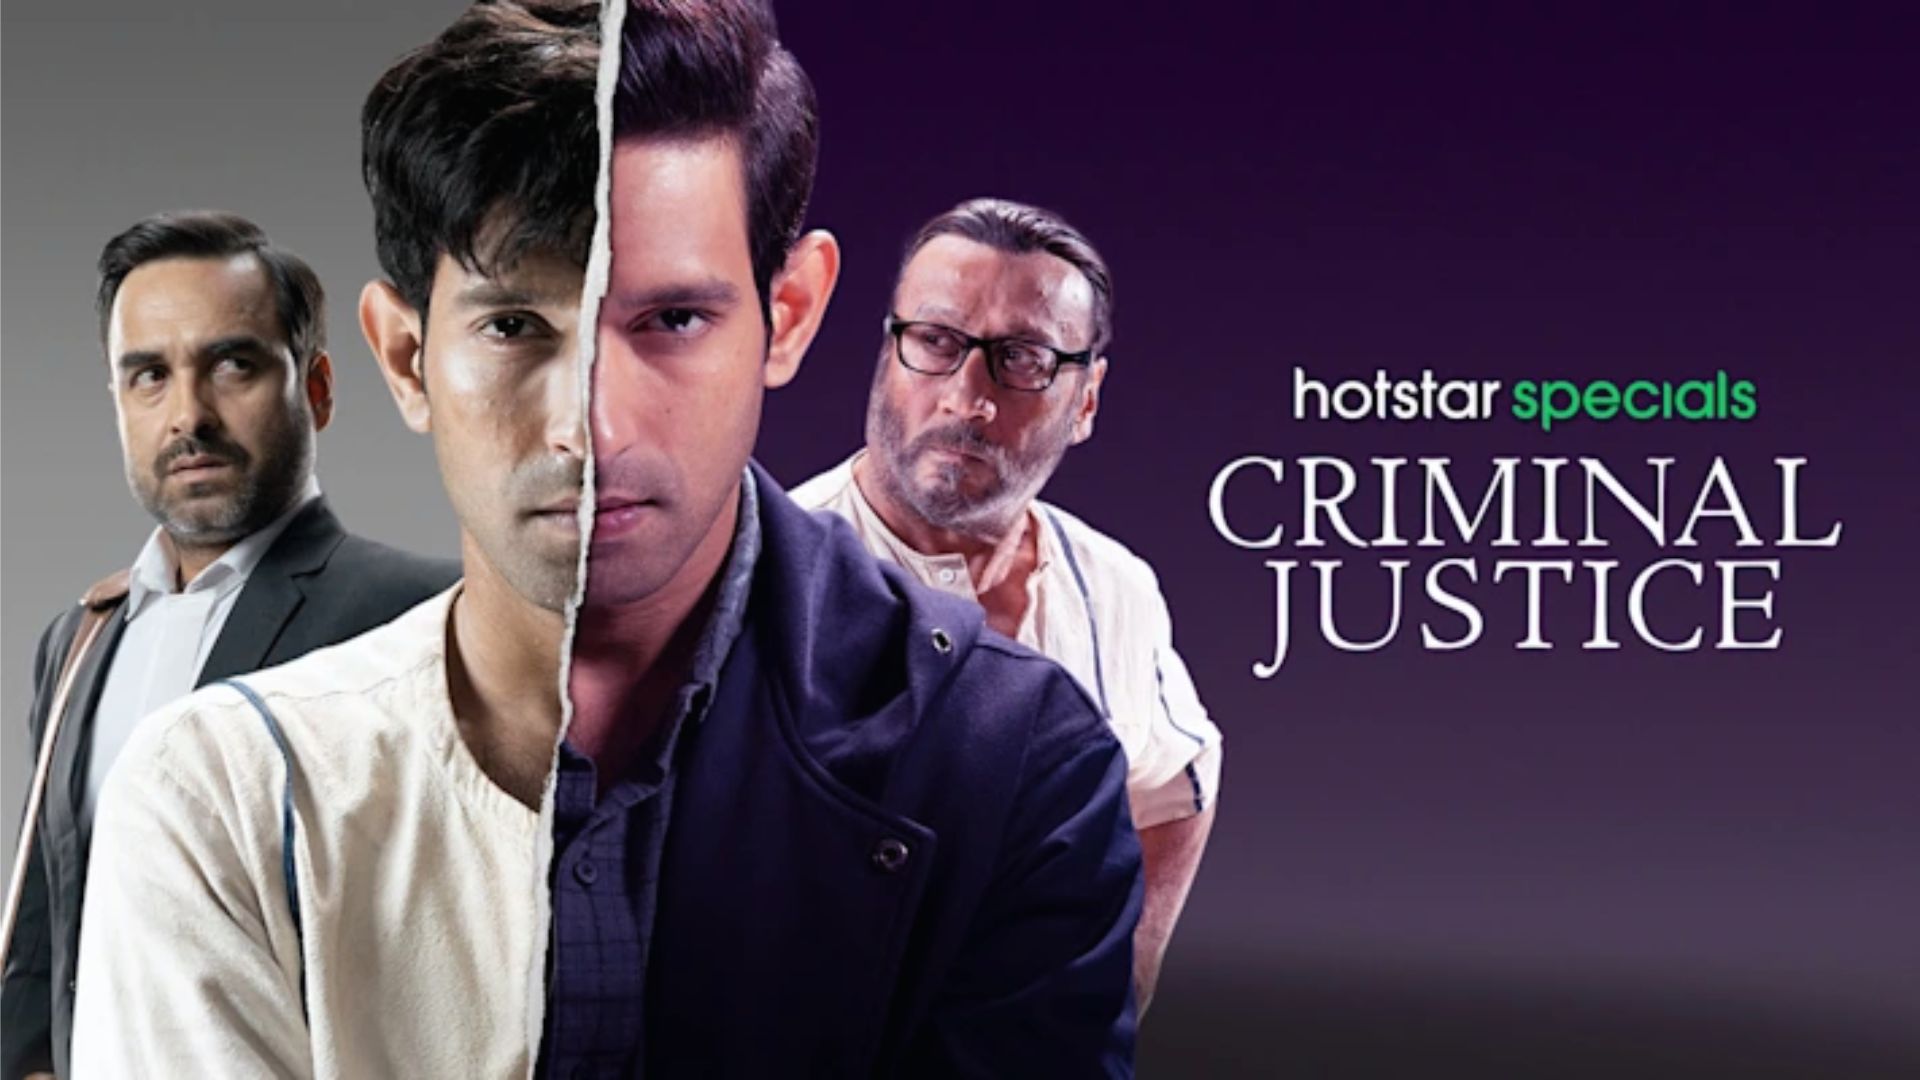 How to Watch Criminal Justice Season 4 Online For Free?